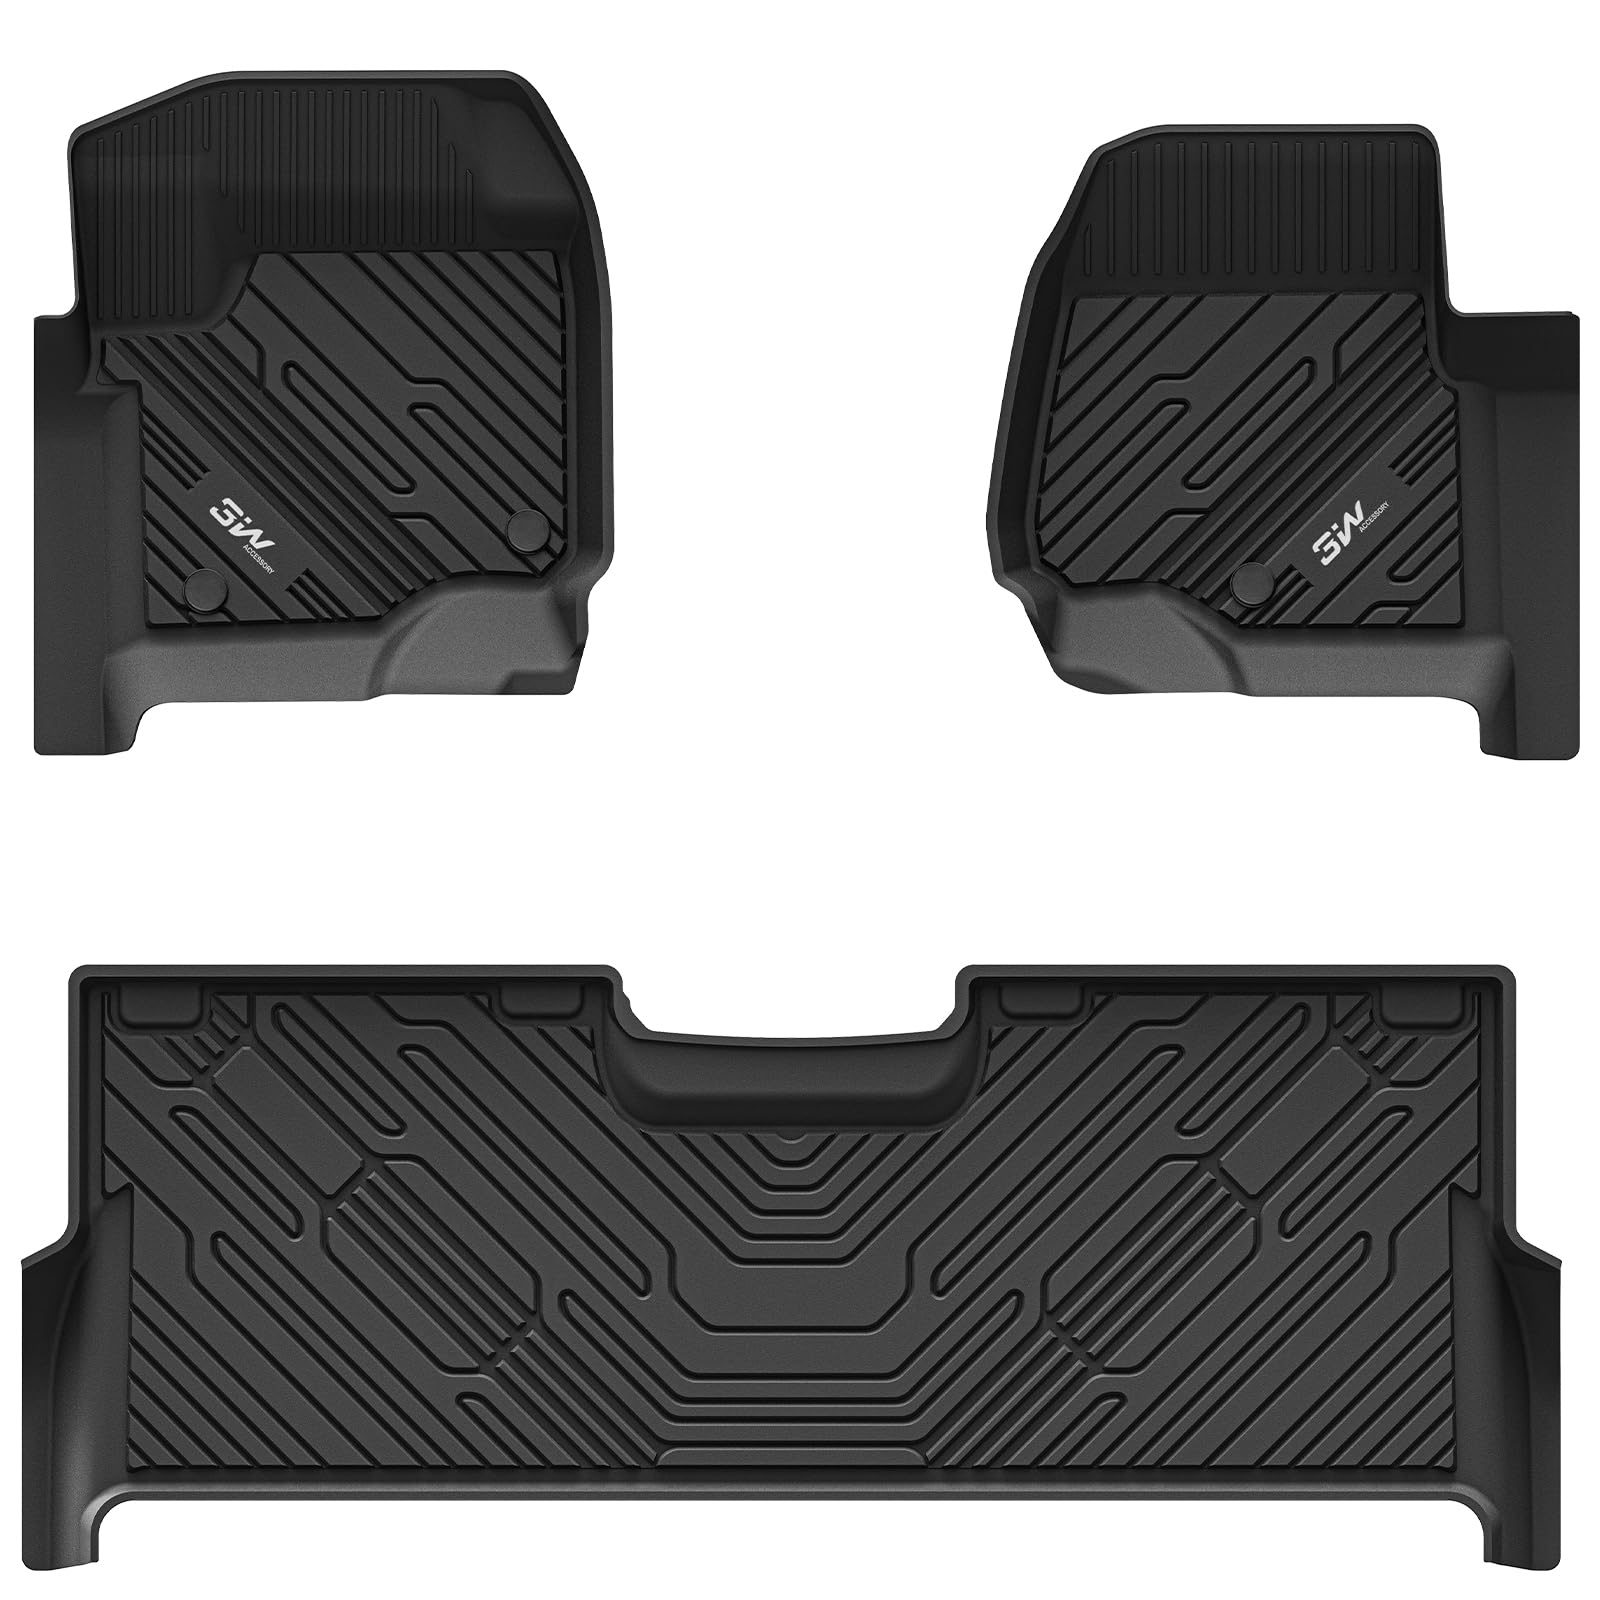 3W Custom Floor Mats Ford F250 F350 F450 F550 2017-2024 Super Duty Crew Cab with Under Seat Storage (Bucket Seat) TPE Material & All-Weather Protection Vehicles & Parts 3Wliners 2015-2024 F250/F350/F450/F550 1st&2nd Row Mats